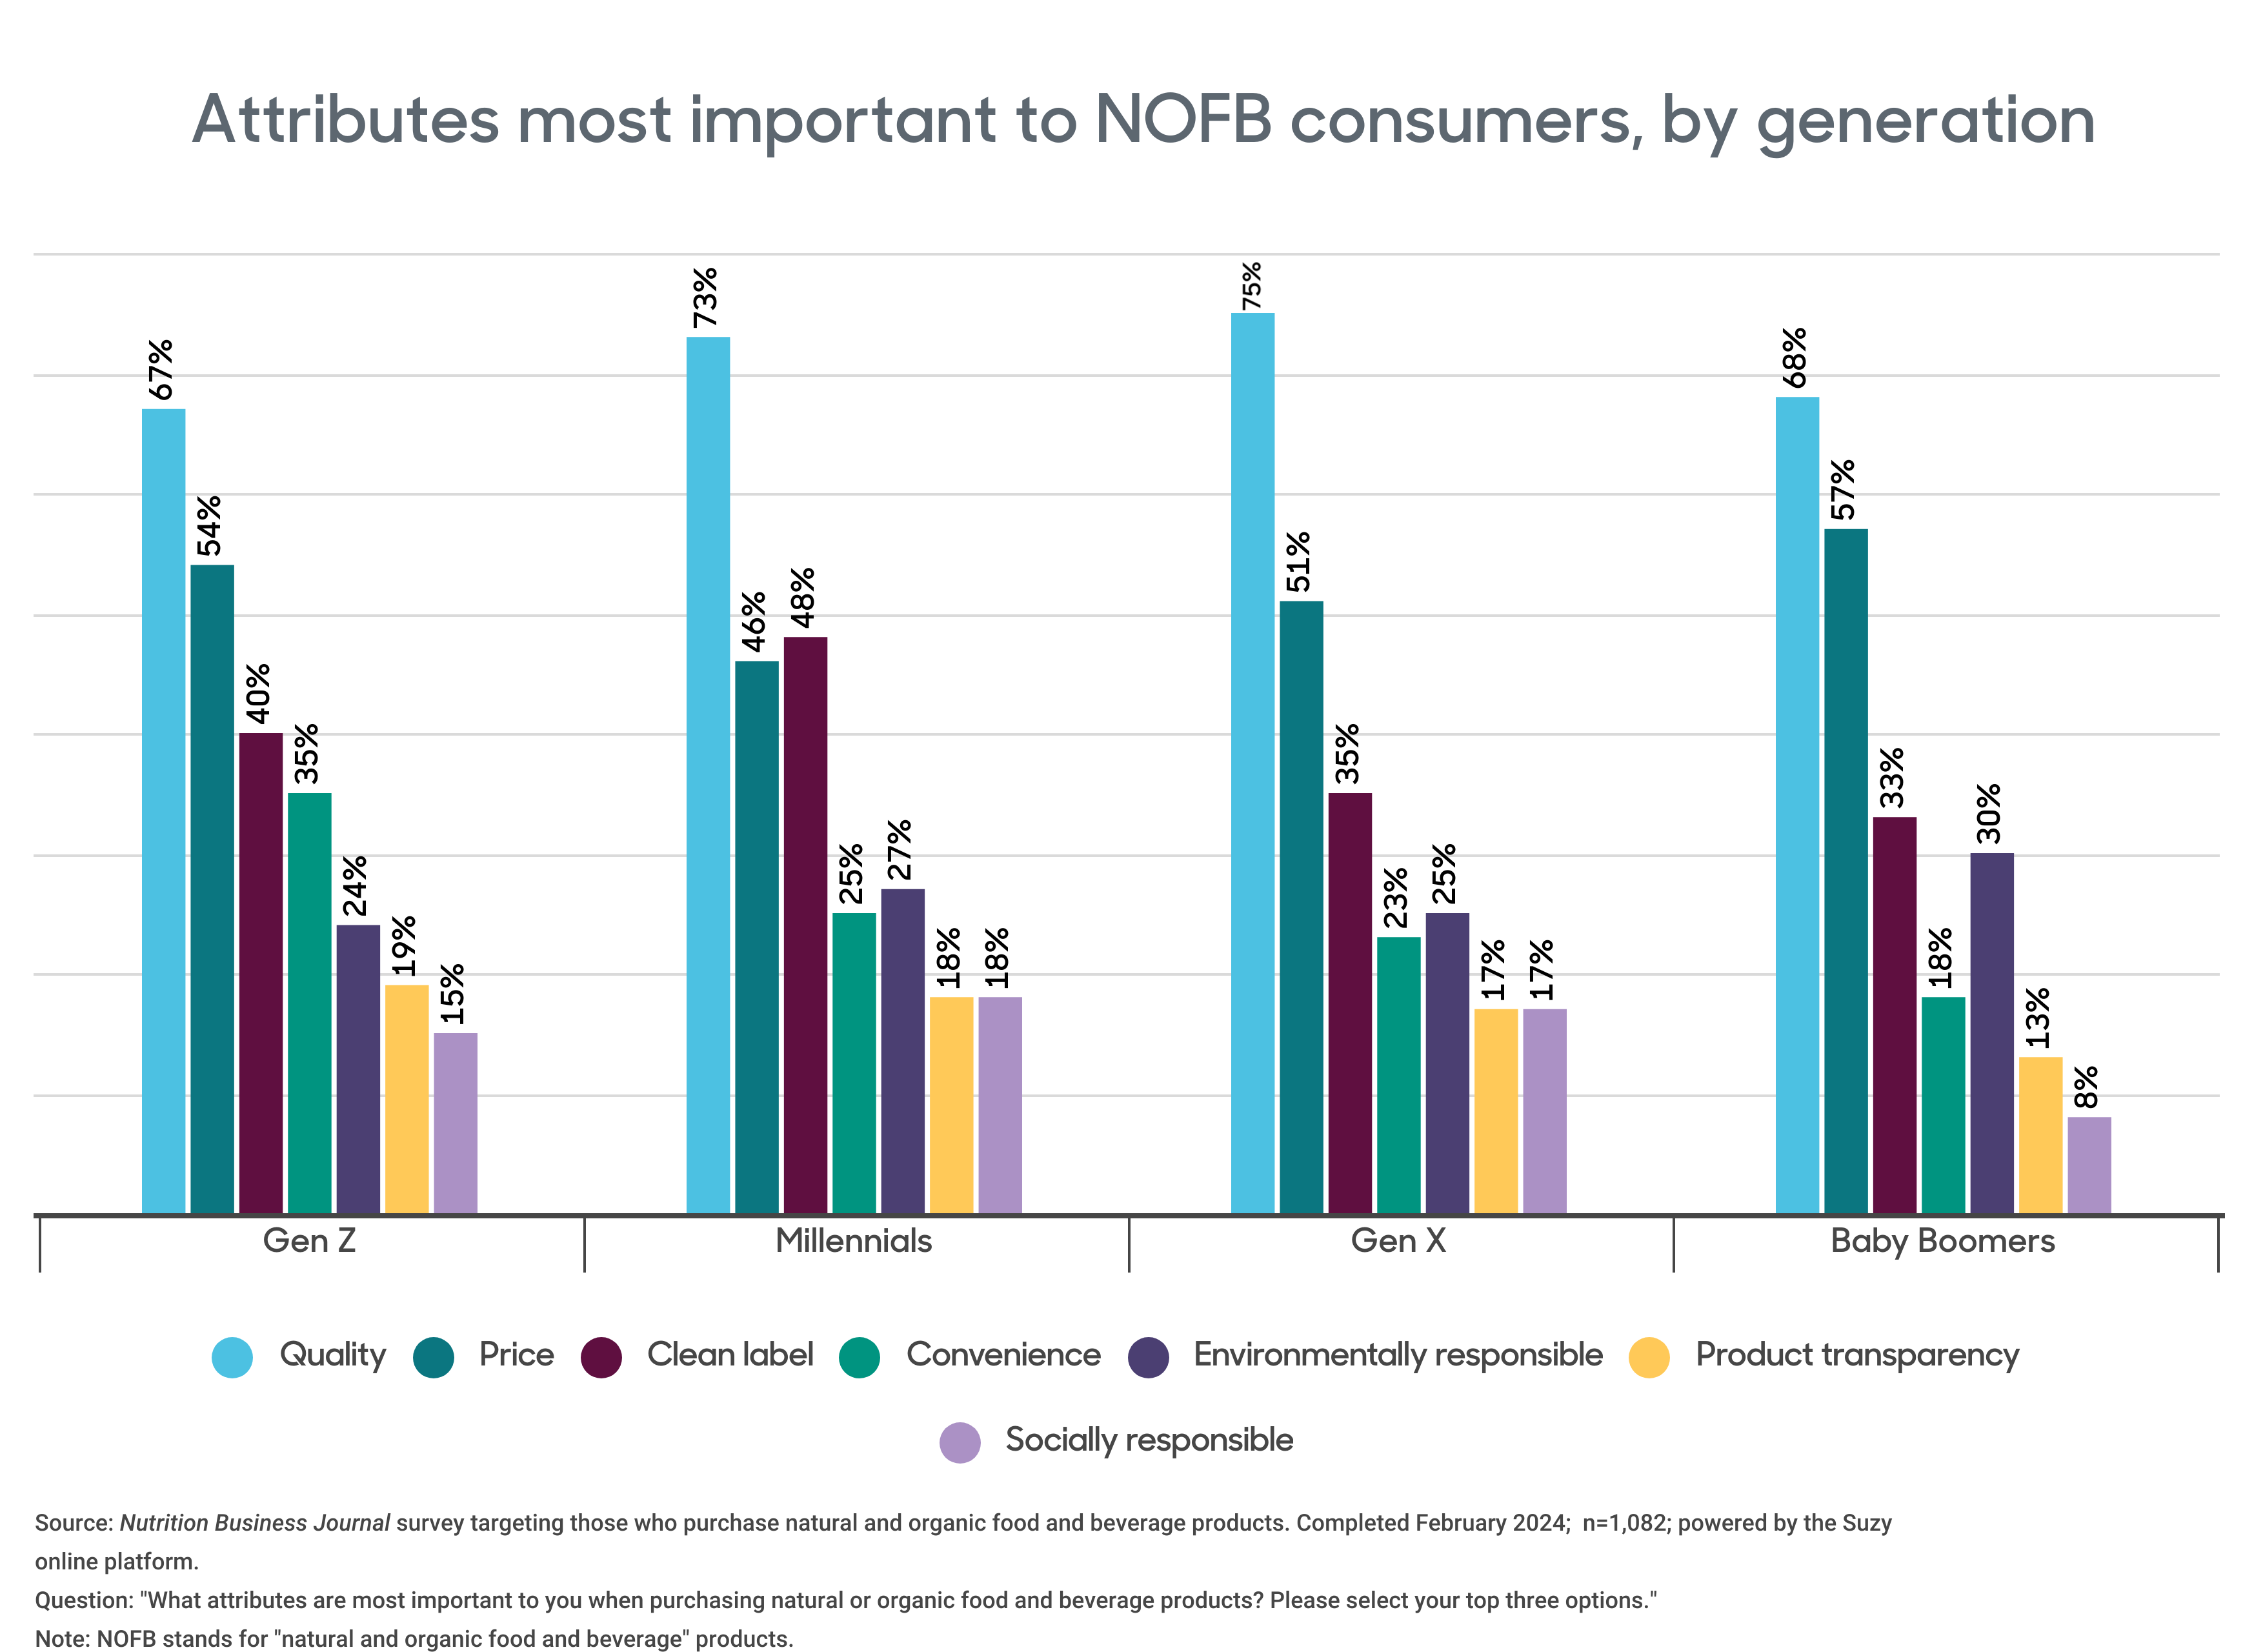 19._Attributes_most_important_to_NOFB_consumers_by_generation.png